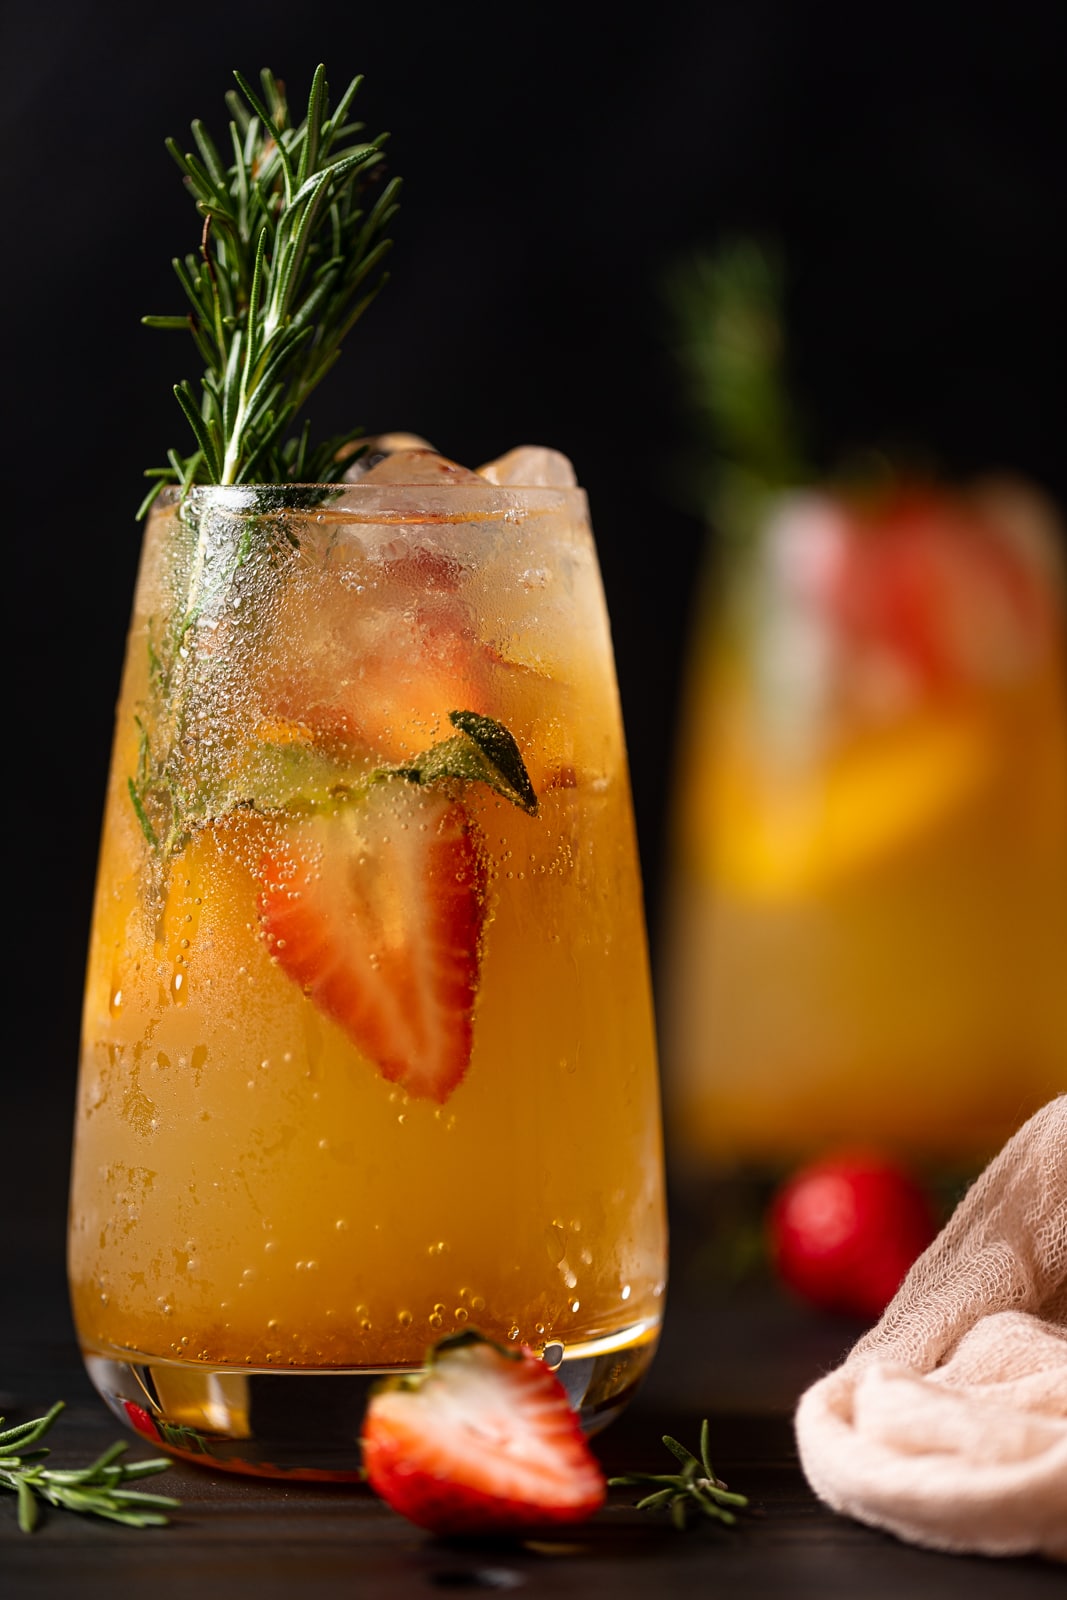 Peachy Ginger Beer Mocktail with halved strawberries and rosemary sprigs